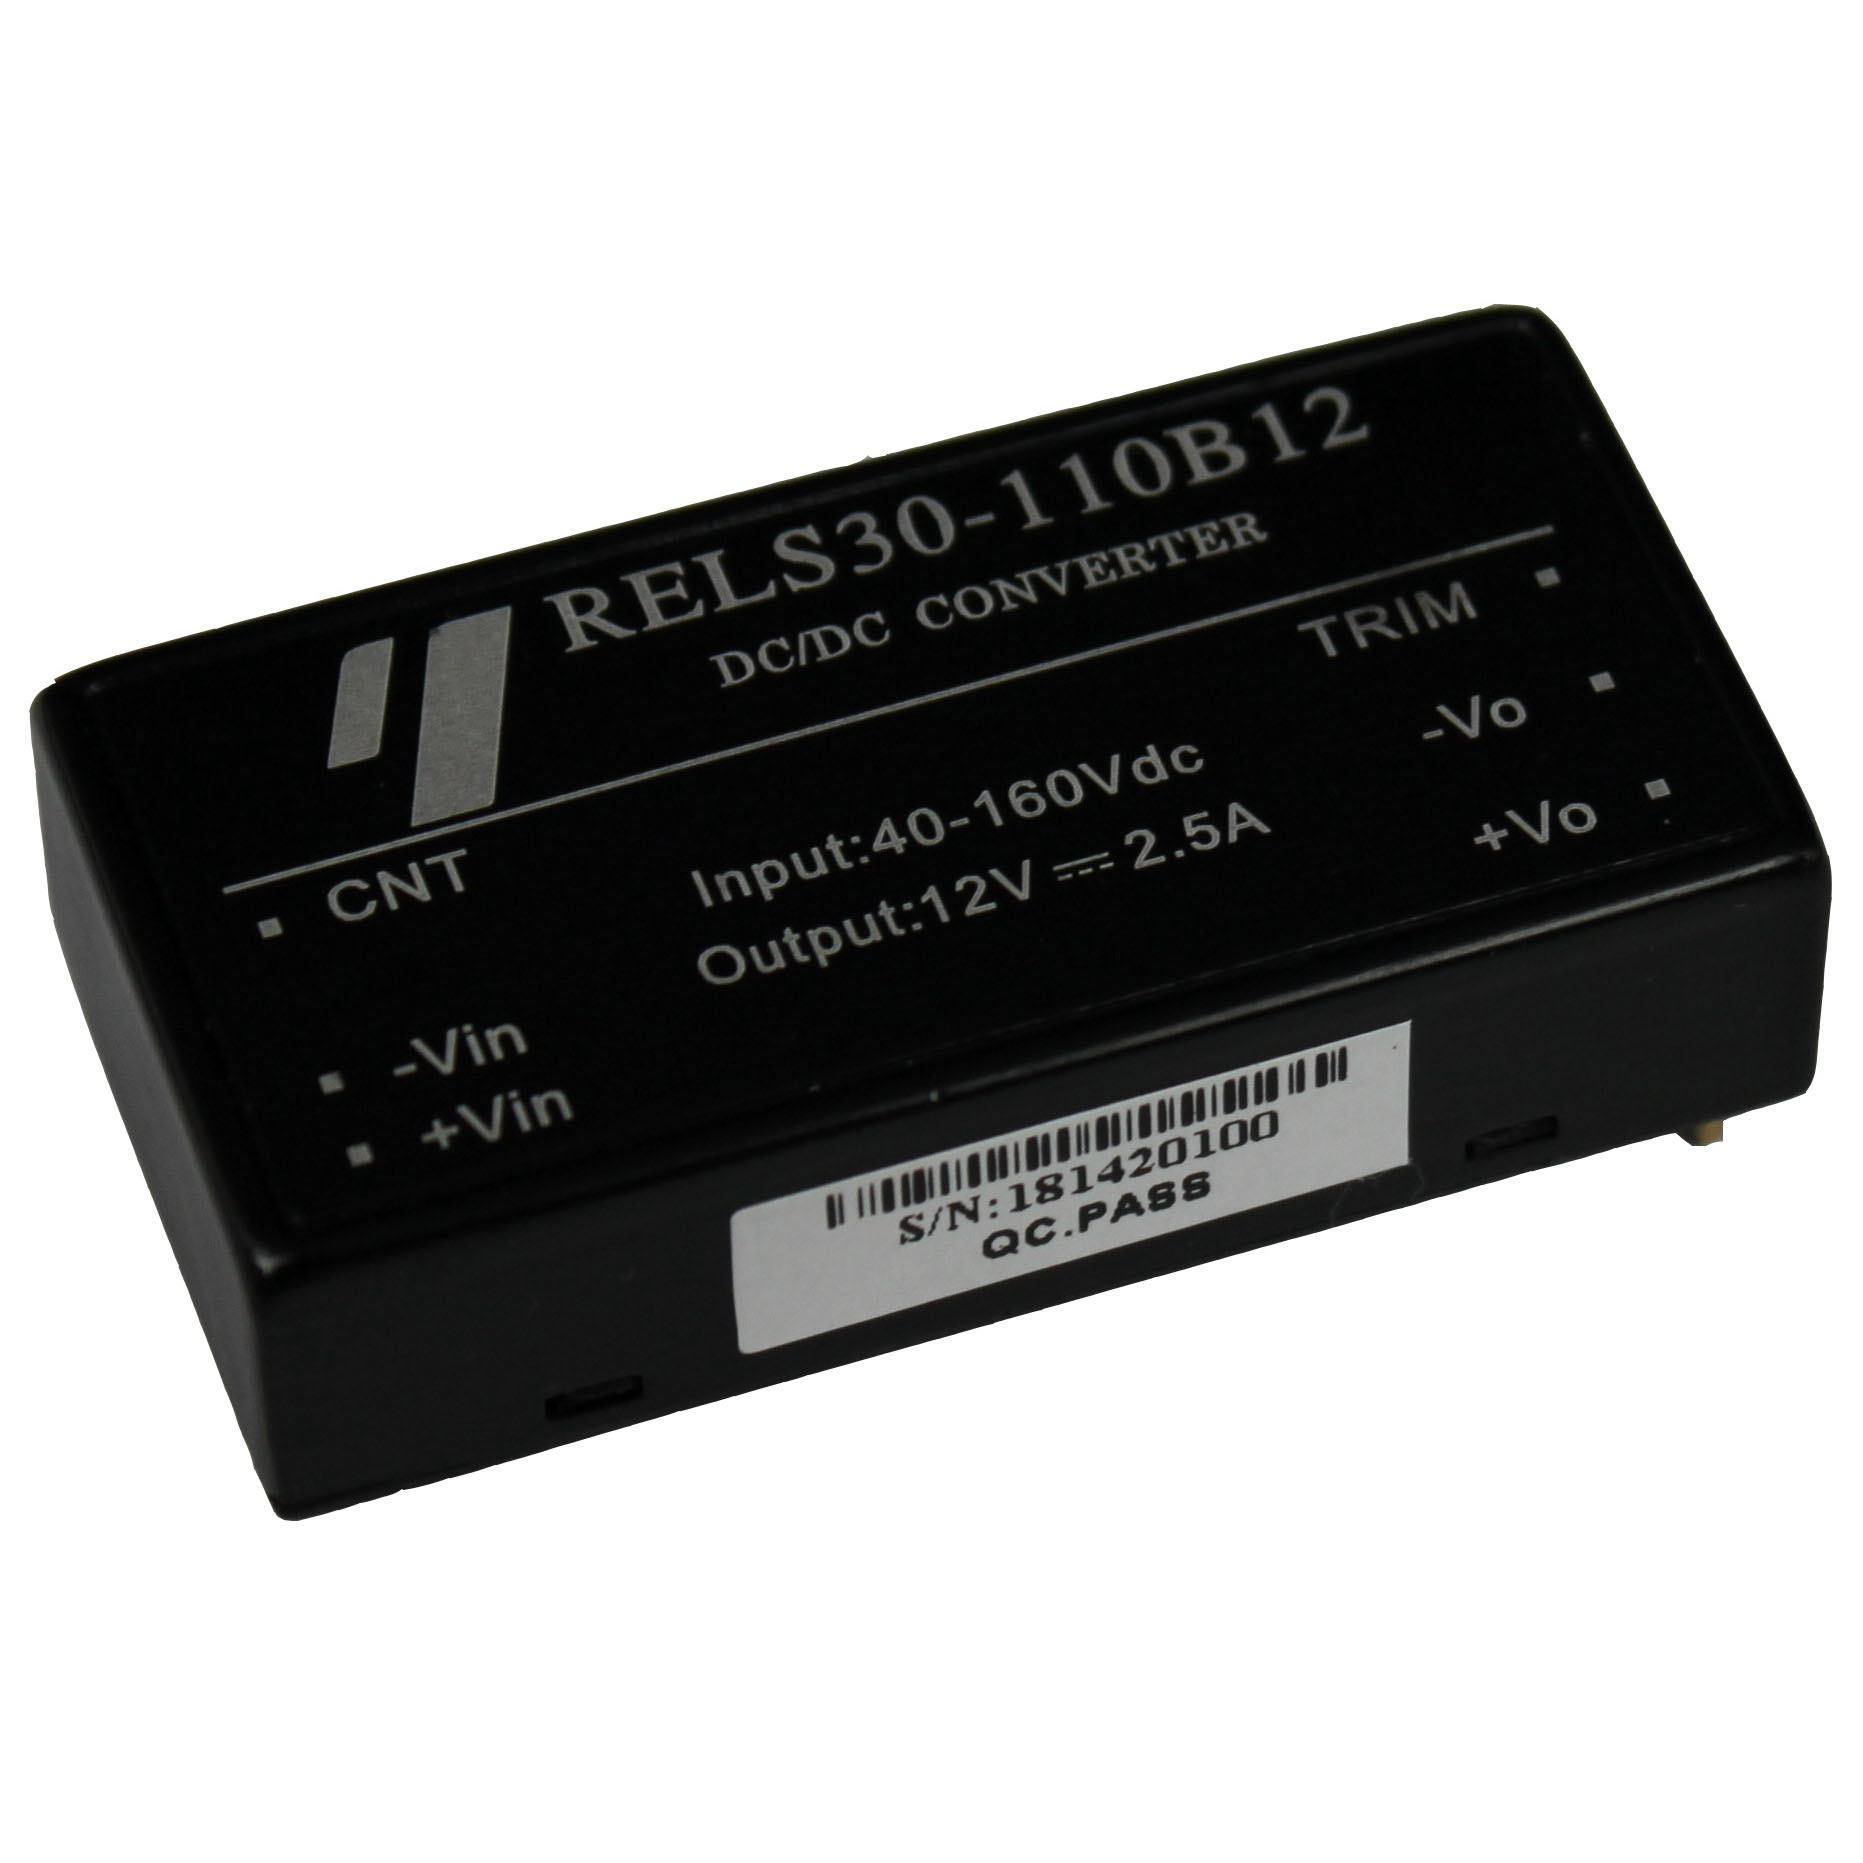 RELS30-110B12 Railway DC DC Converter ,Wide input 40-160V ,1in.×2in. Size